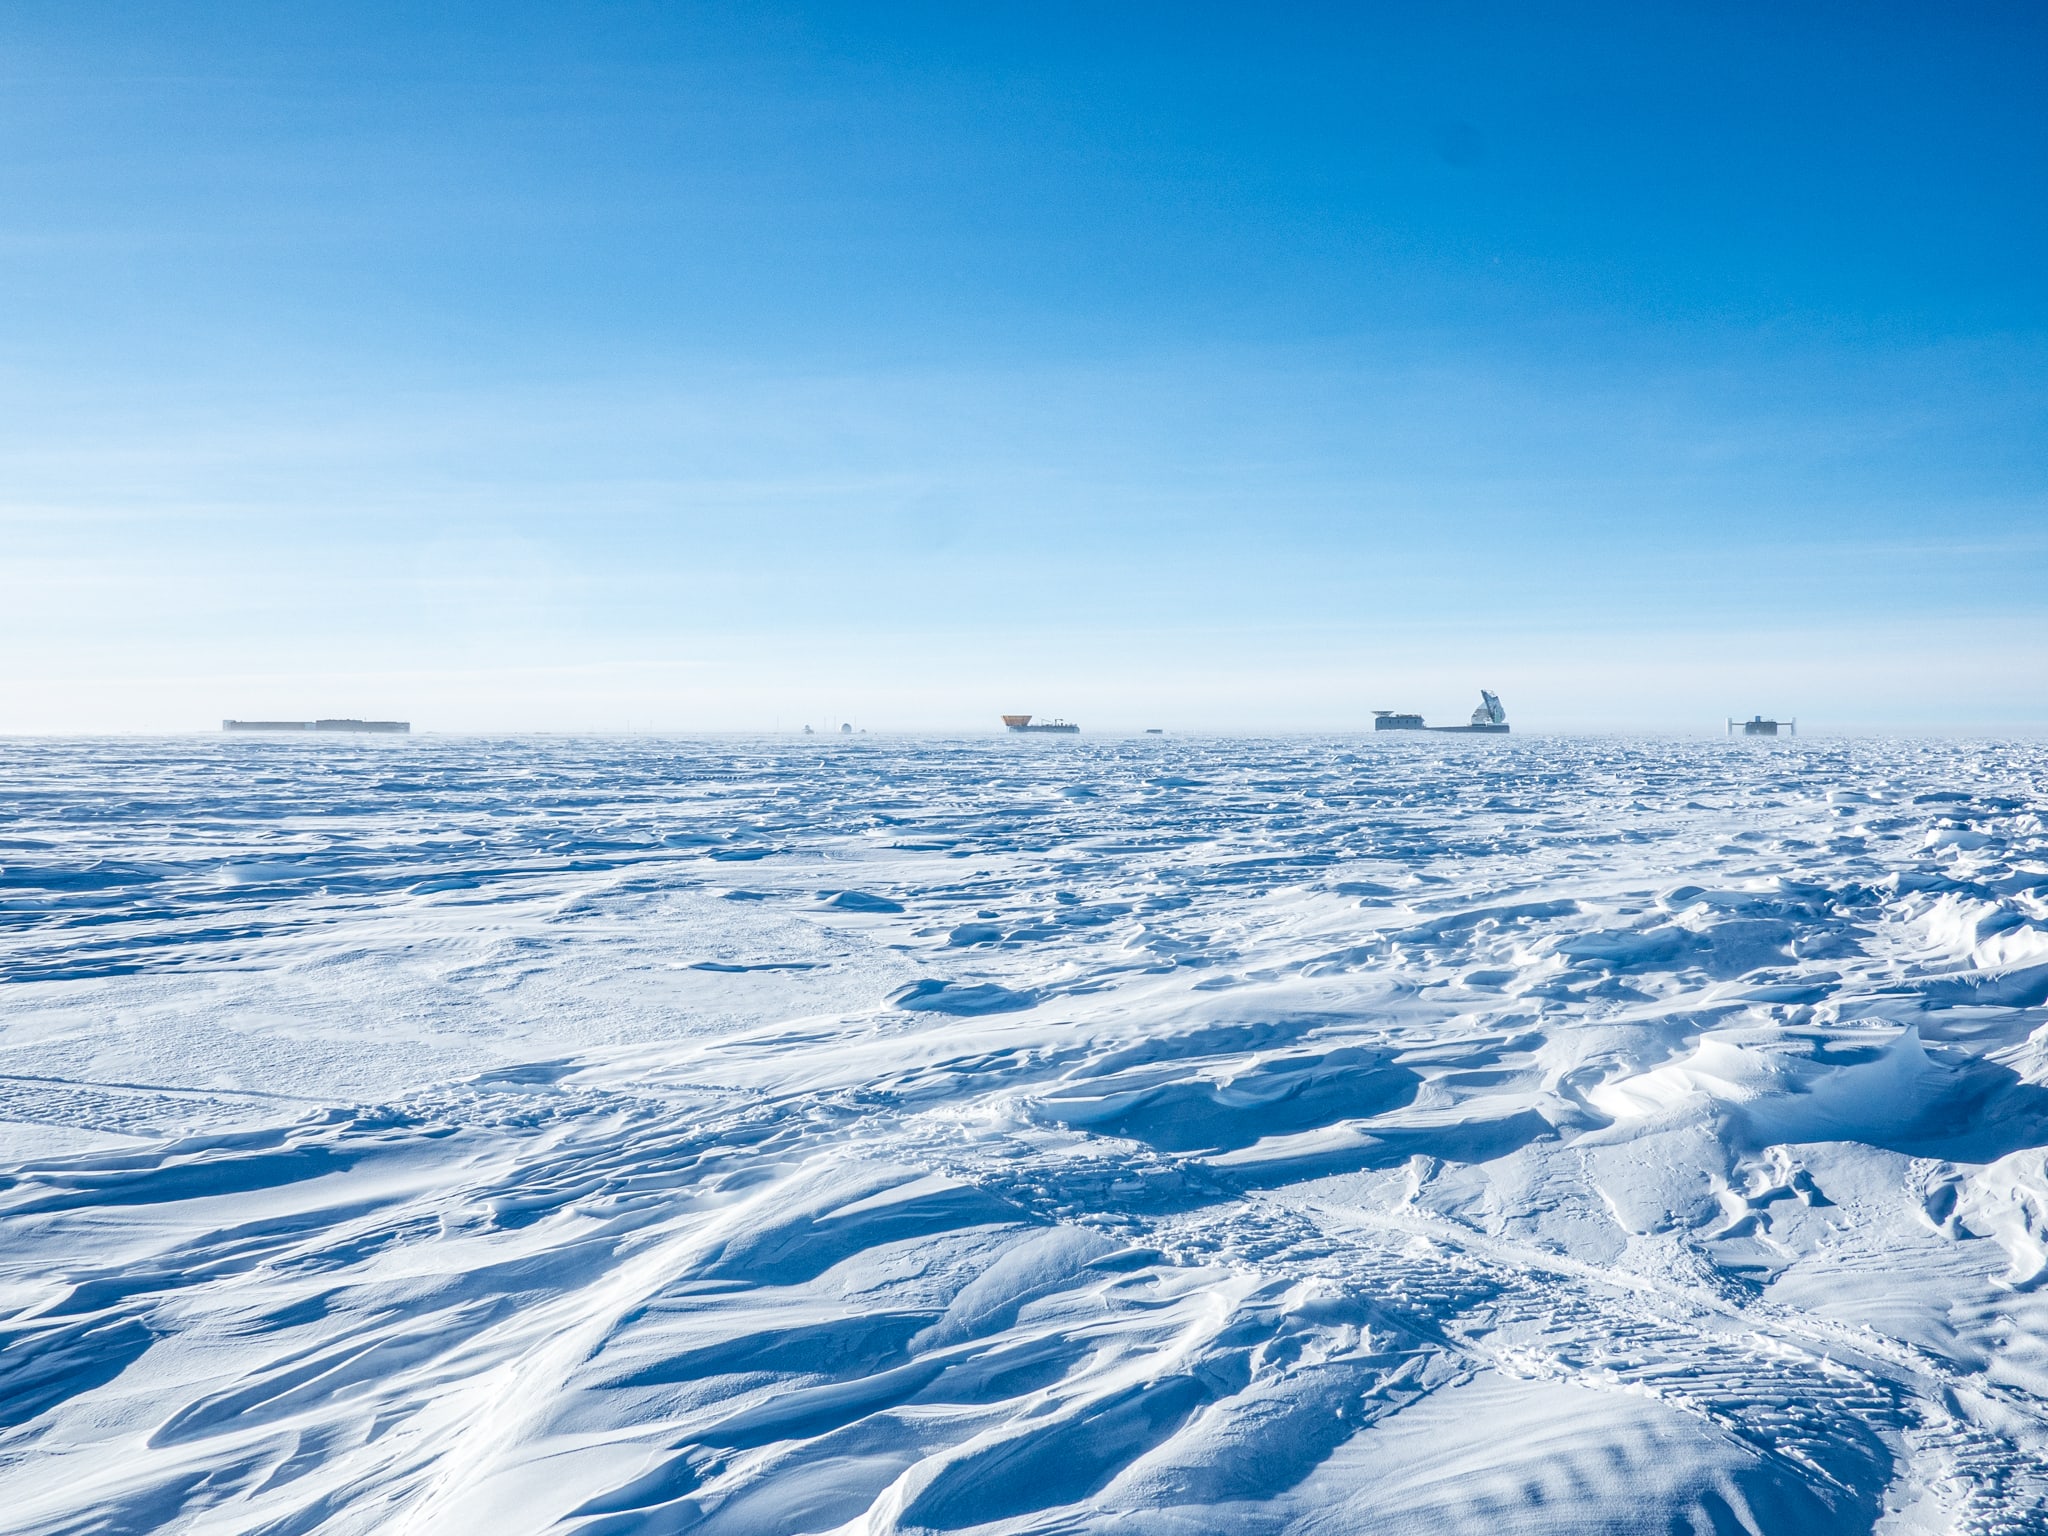 Clear blue skies, tiny South Pole buildings of the Dark Sector on the horizon.